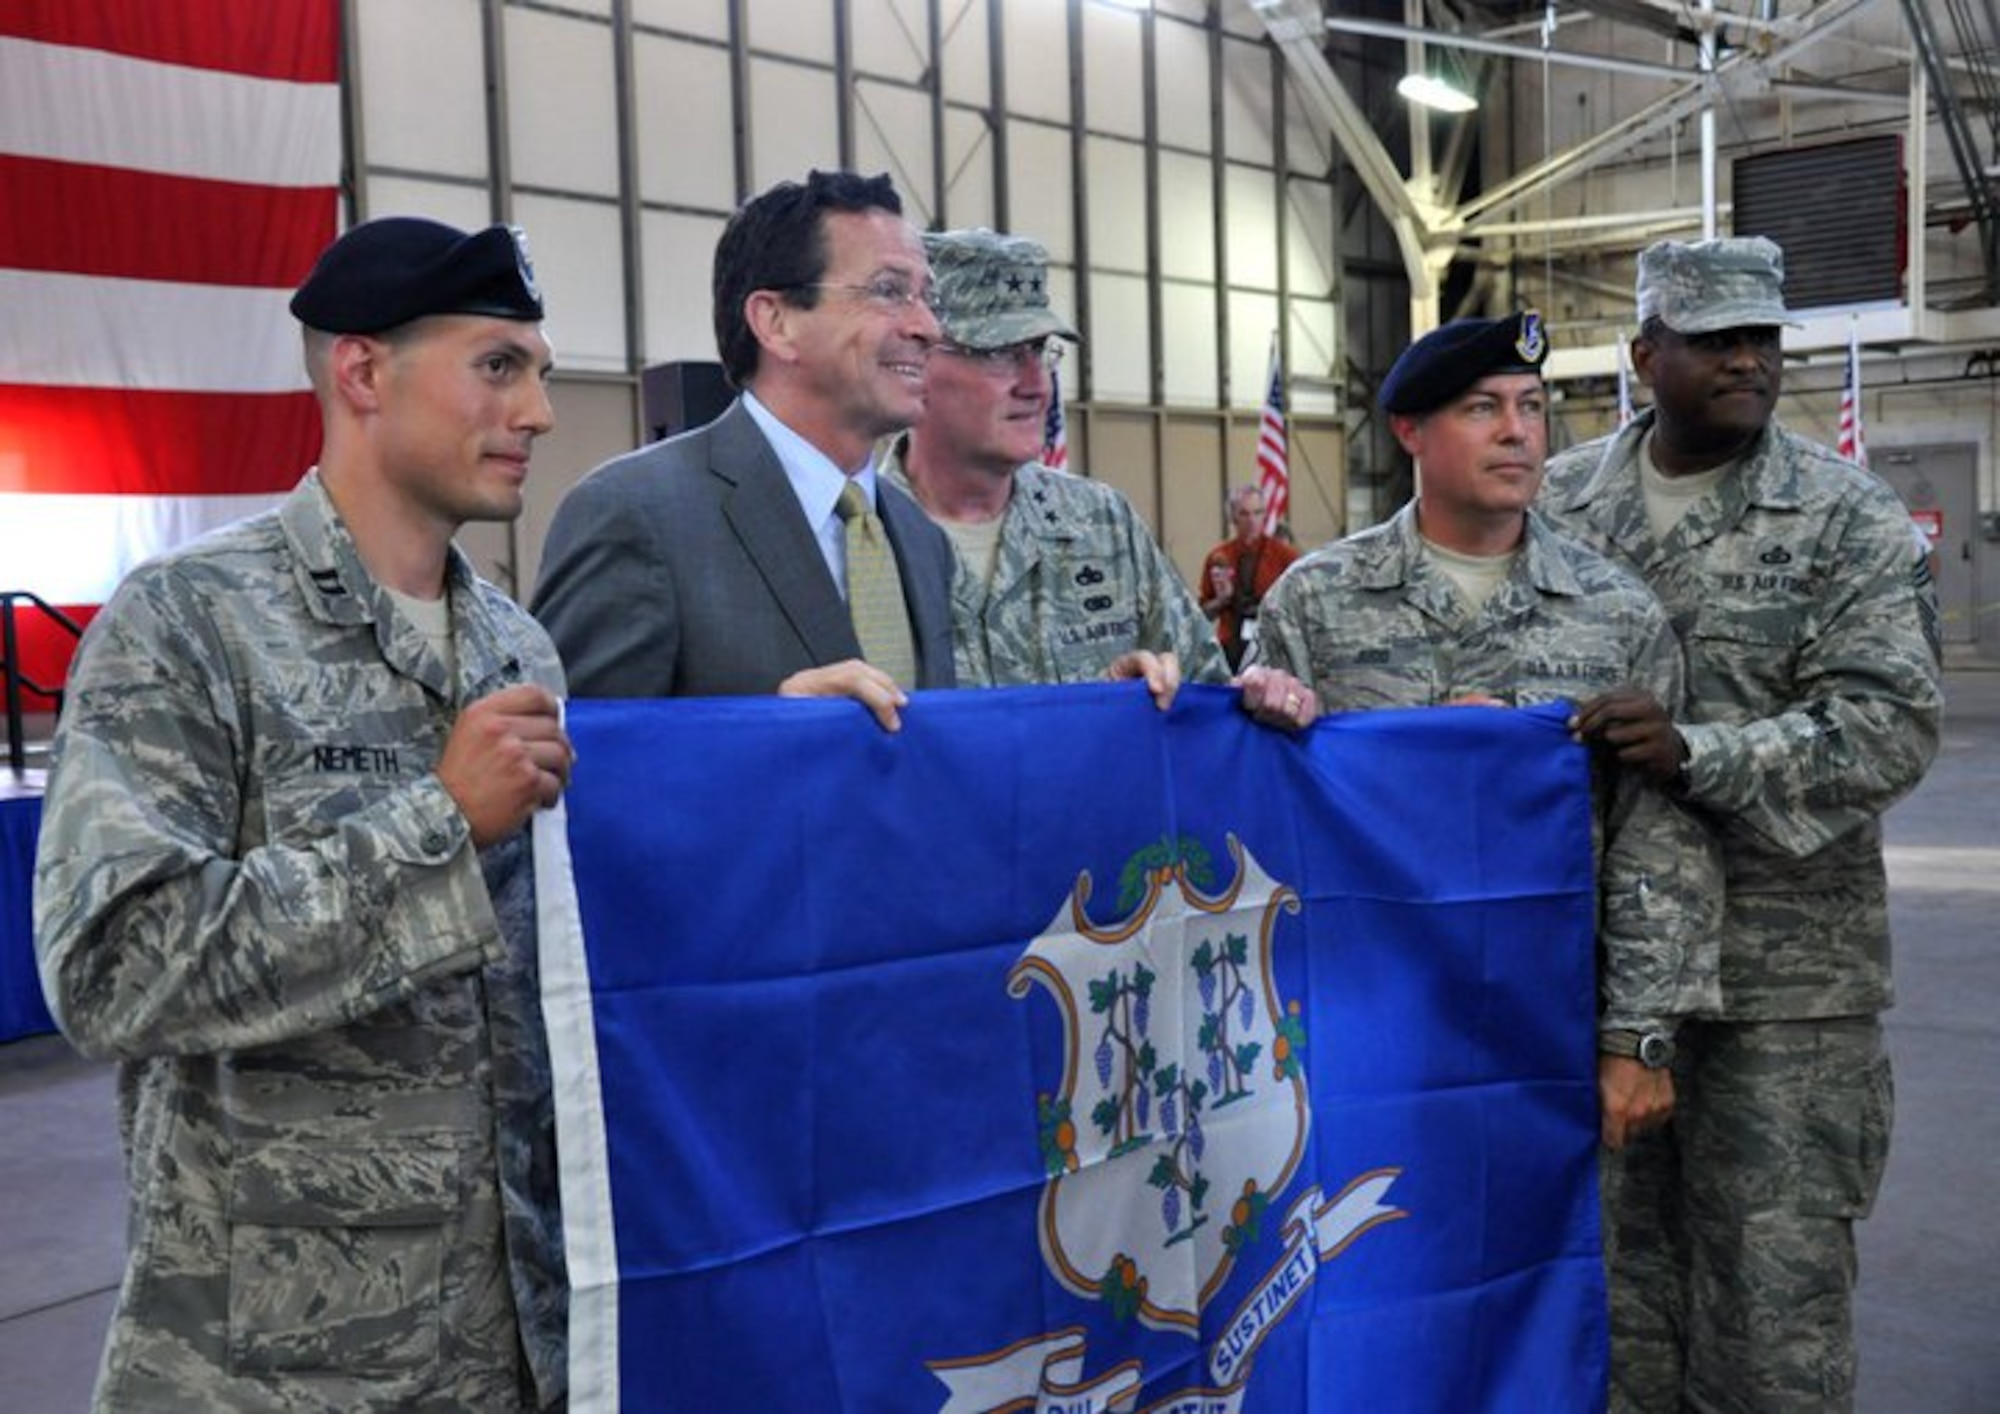 Gov. Dannel P. Malloy poses with Capt. Andrew Nemeth, Maj. Gen. Thaddeus Martin, Master Sgt. Daniel Judd and State Command Chief Master Sgt. John Carter in the main hangar at Bradley Air National Guard Base, East Granby, Conn. July 6, 2011. The Connecticut state flag was presented to Capt. Nemeth, who will command the deployed security forces troops, following a formal Send Off Ceremony held in honor of members of the 103rd Security Forces and 103rd Civil Engineer Squadrons who have since deployed to Afghanistan. (U.S. Air Force photo by Army 2nd Lt. Emily Hein)